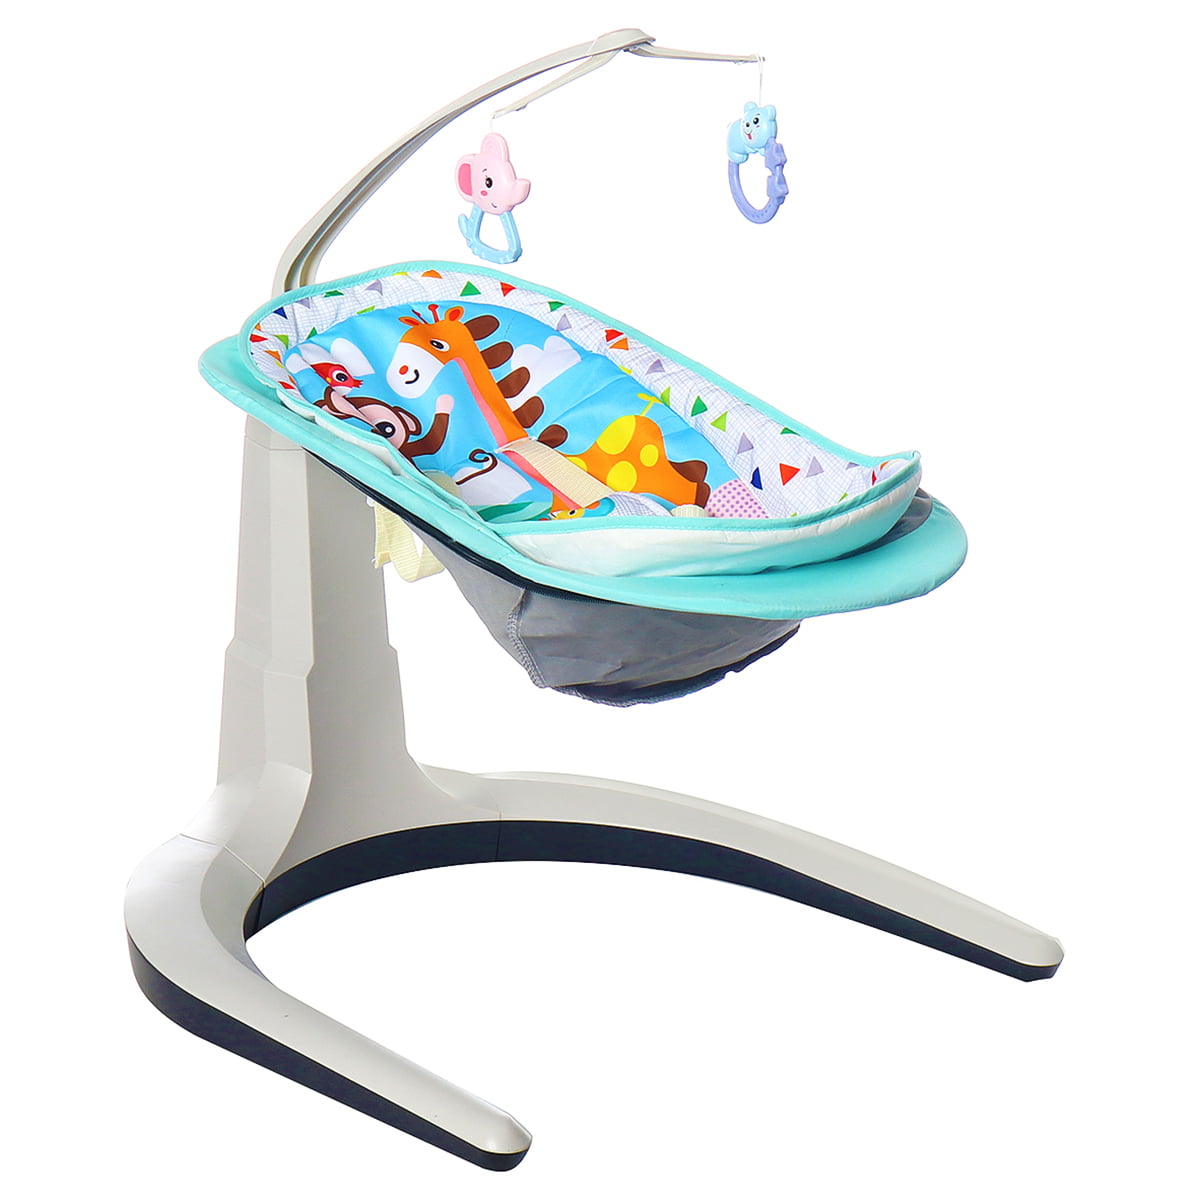 Ankidz Toddler Learning Walker Suitable for Baby Children 0-2 Years Old Swings & Chair Bouncers